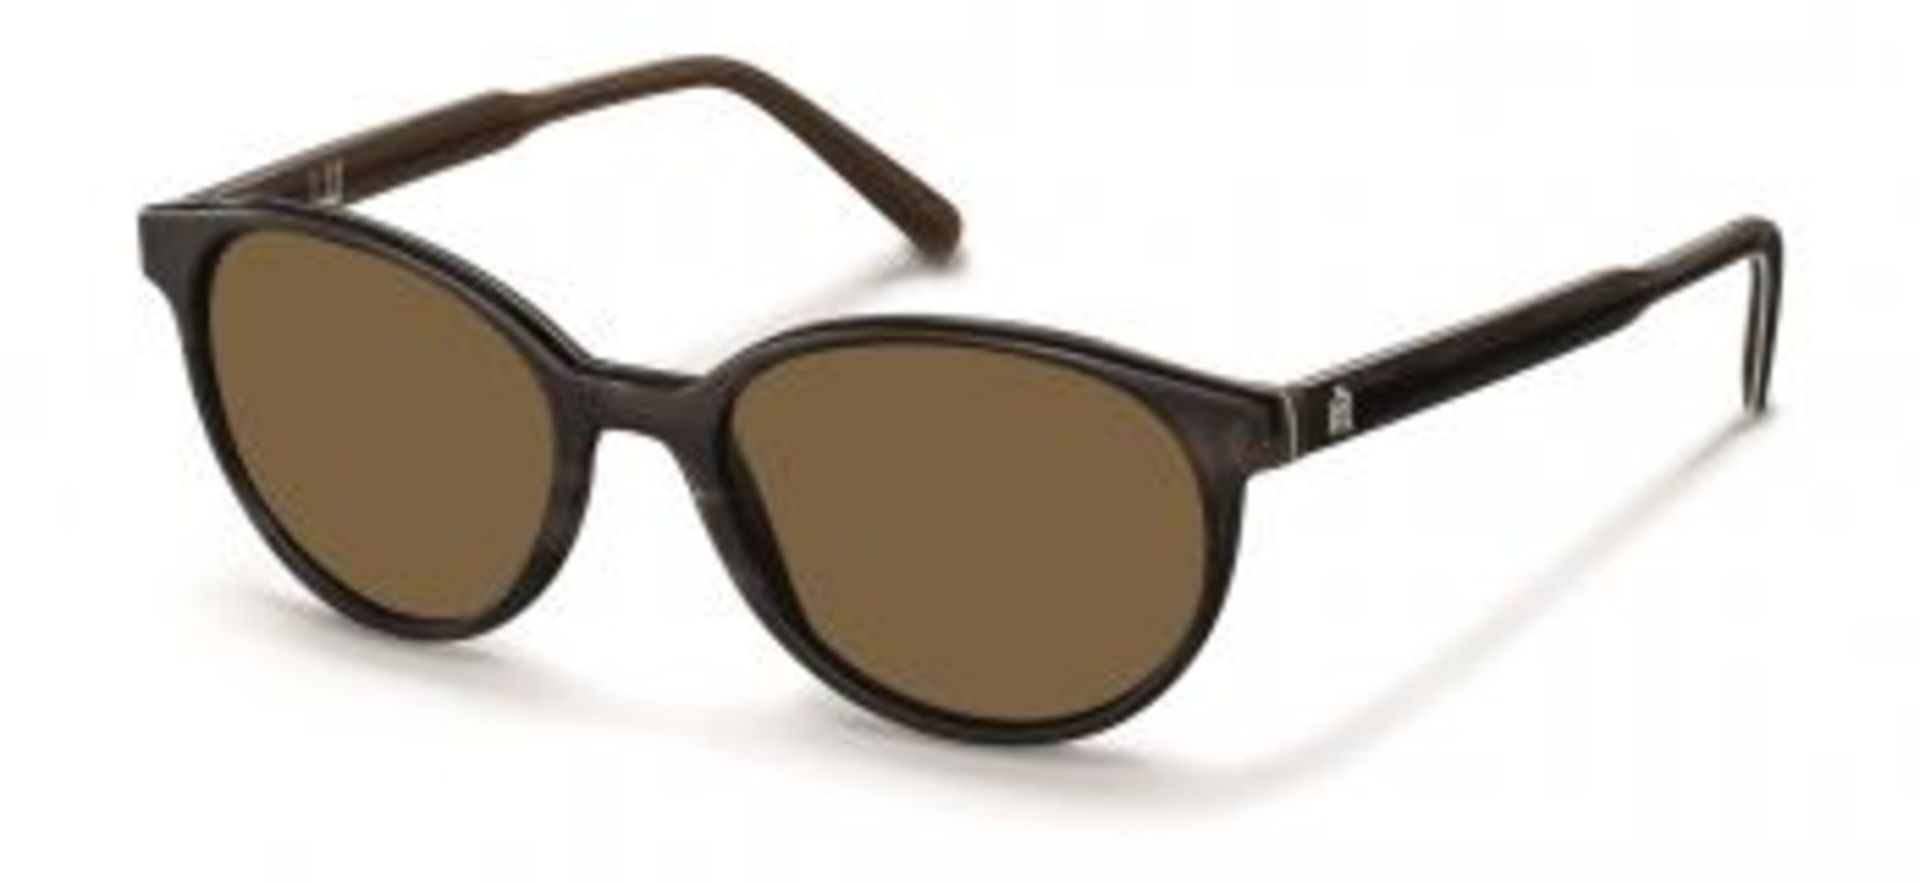 Brand New Pair Of Mens Dunhill Sunglasses - Grey Plastic Frame With Brown Lens RRP: £145.00 D3007-C